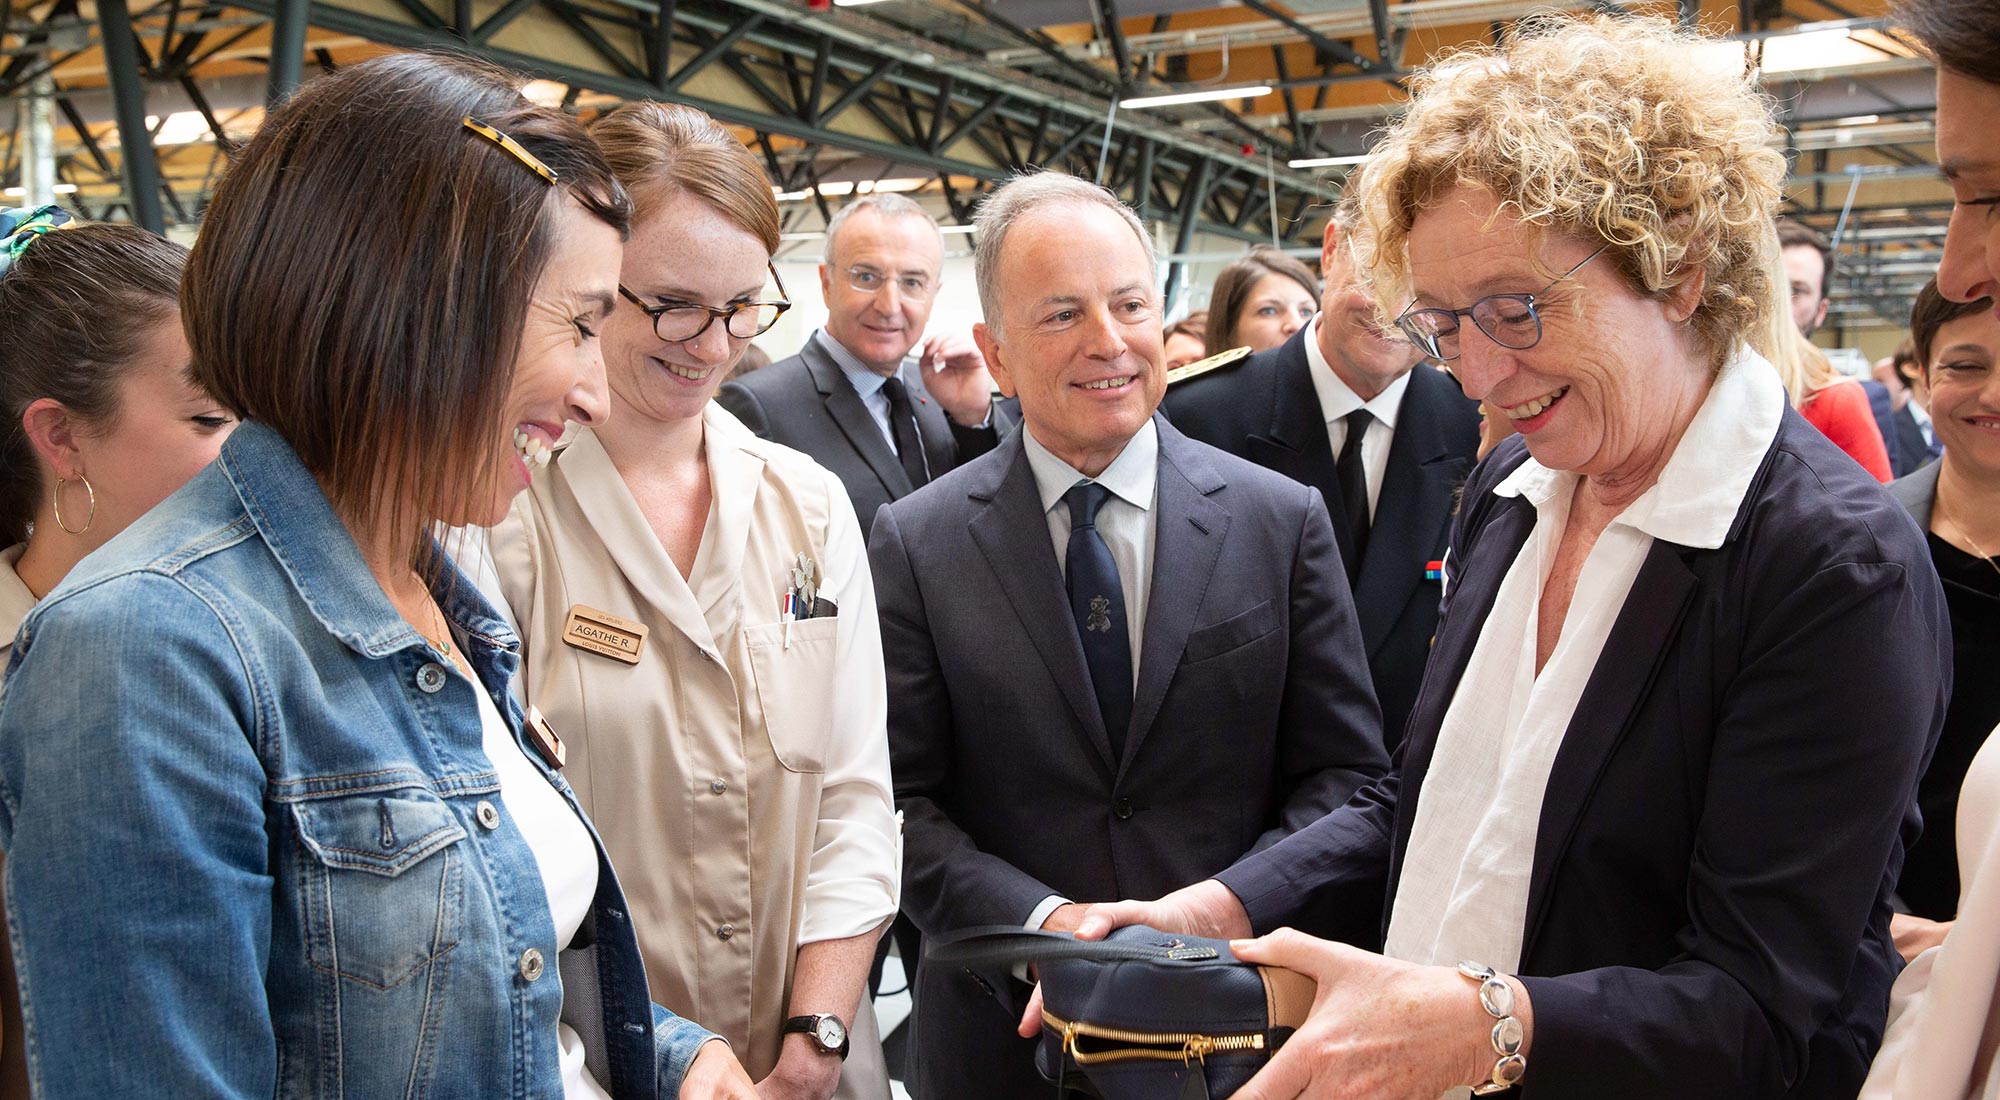 Louis Vuitton inaugurates 16th workshop in France at Beaulieu-sur